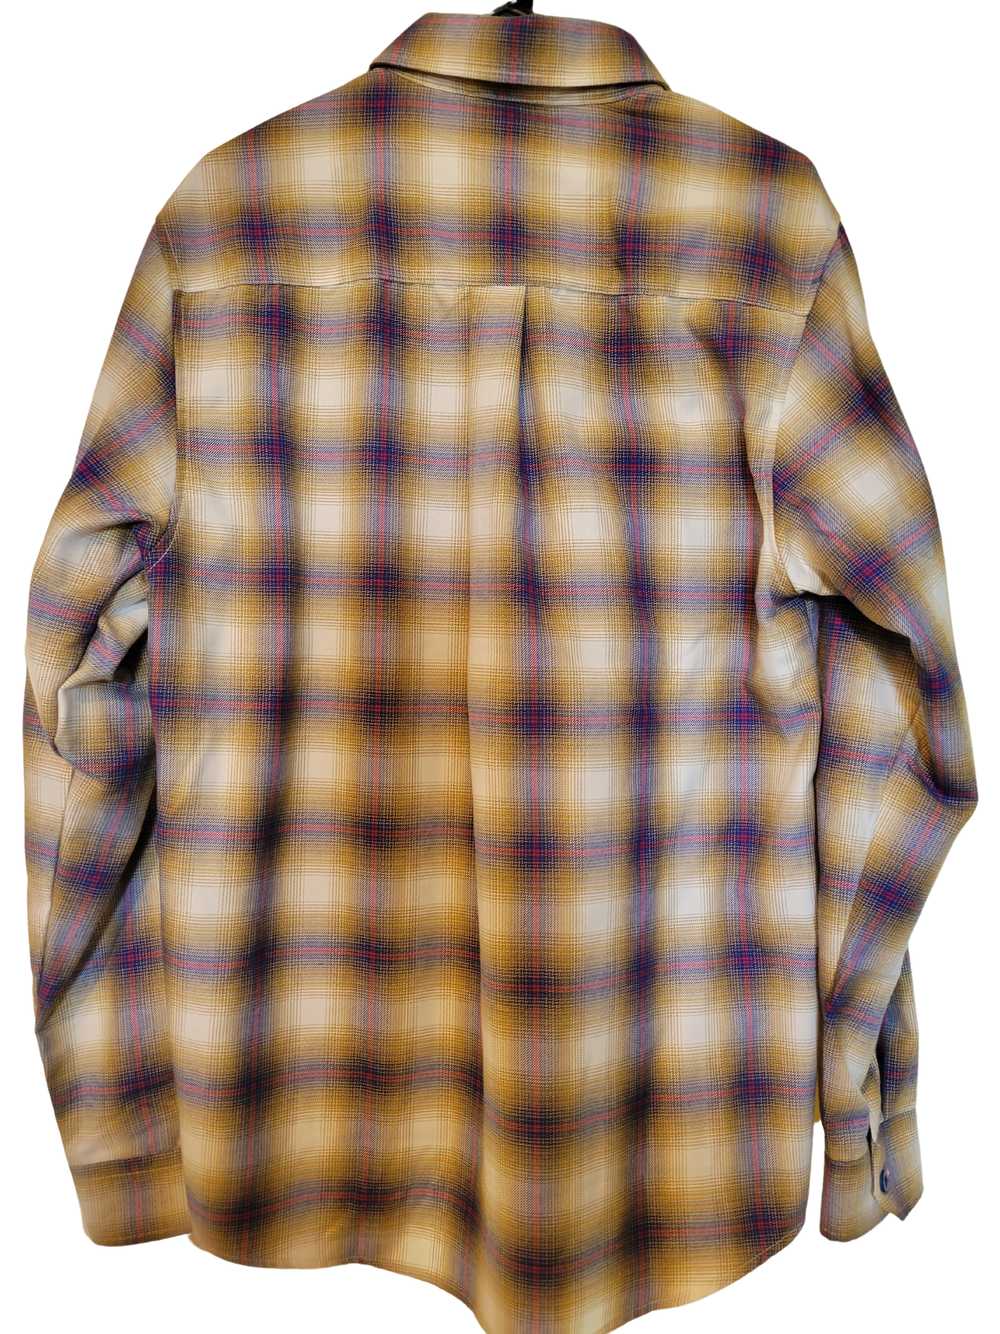 dixxon ST Join The Army Flannel - image 4